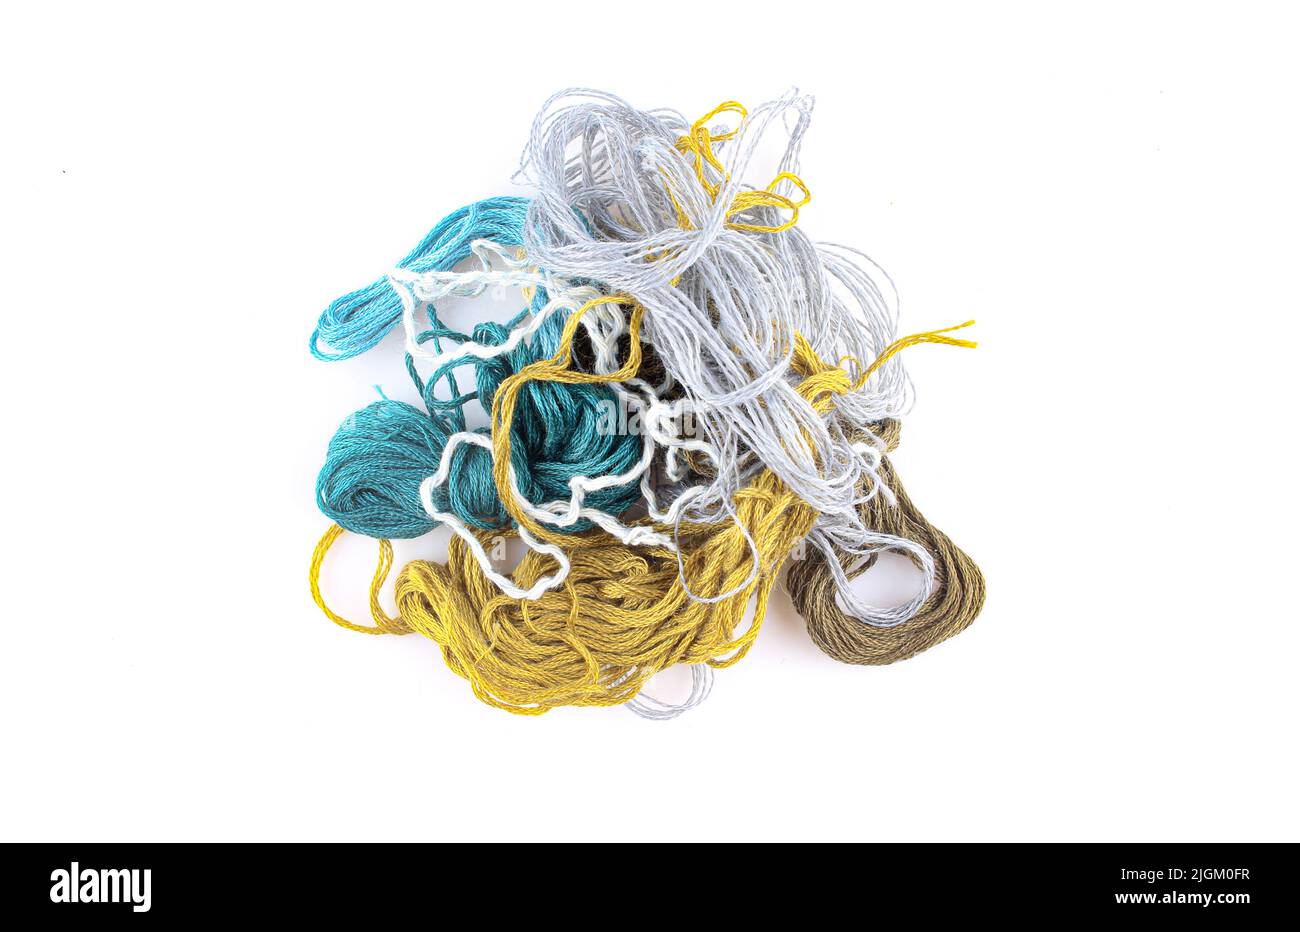 Bundle of tangled colorful textile strings isolated on white background Stock Photo